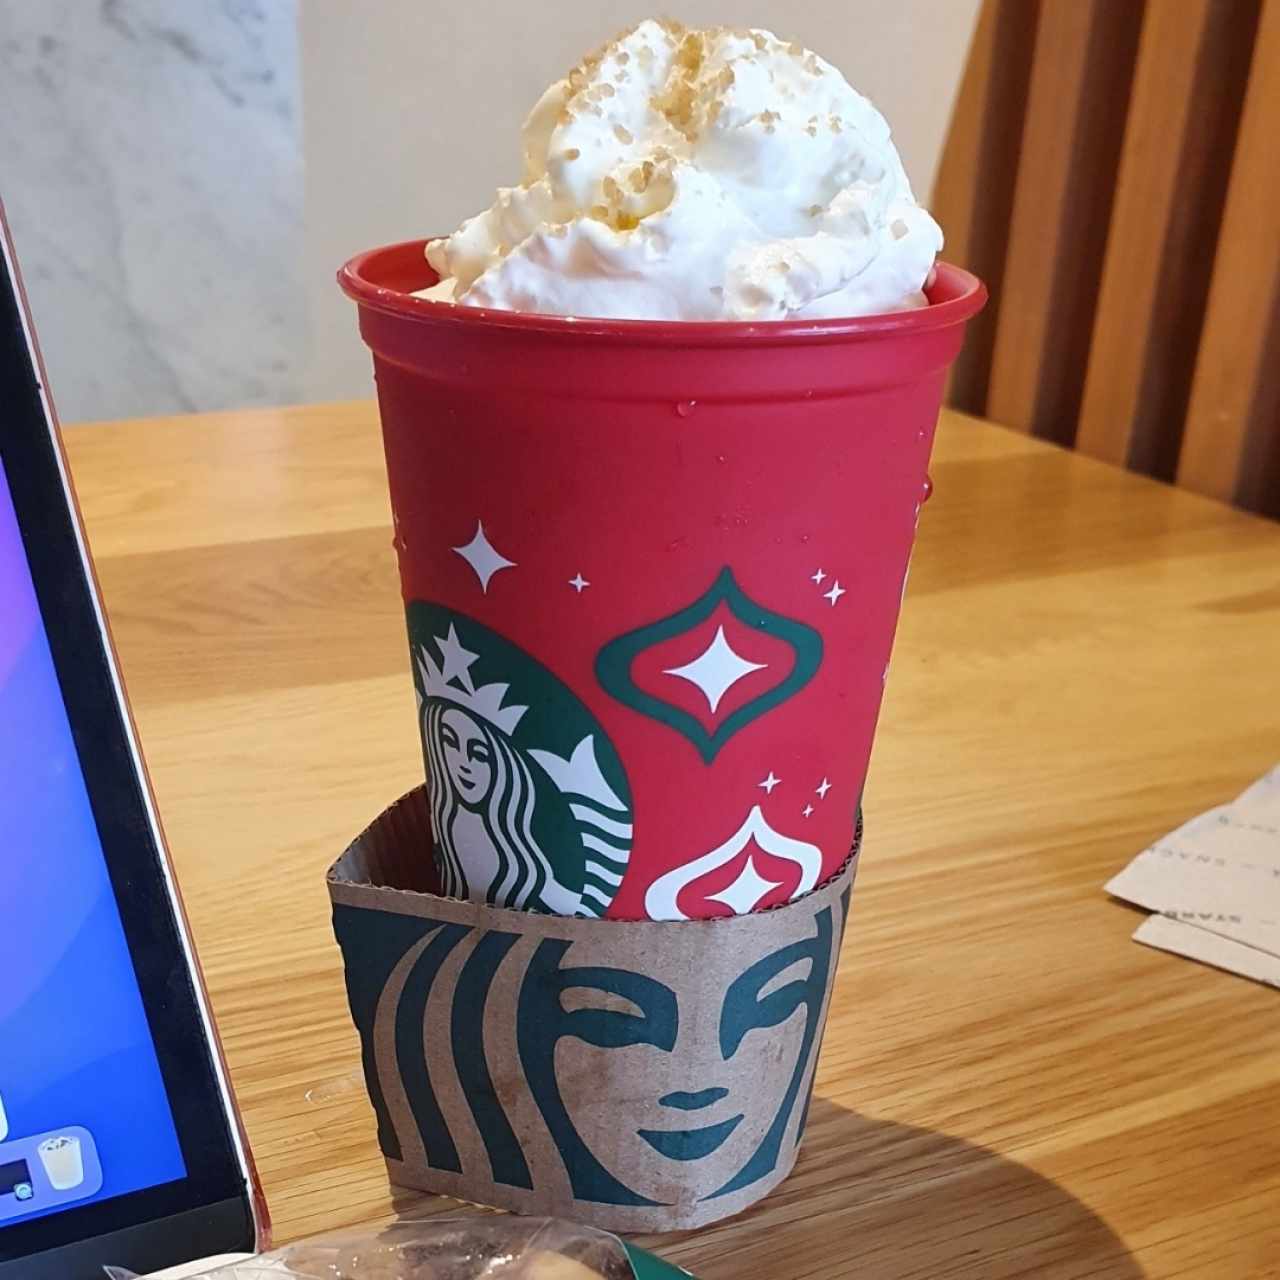 Toffee Nut frappuccino 